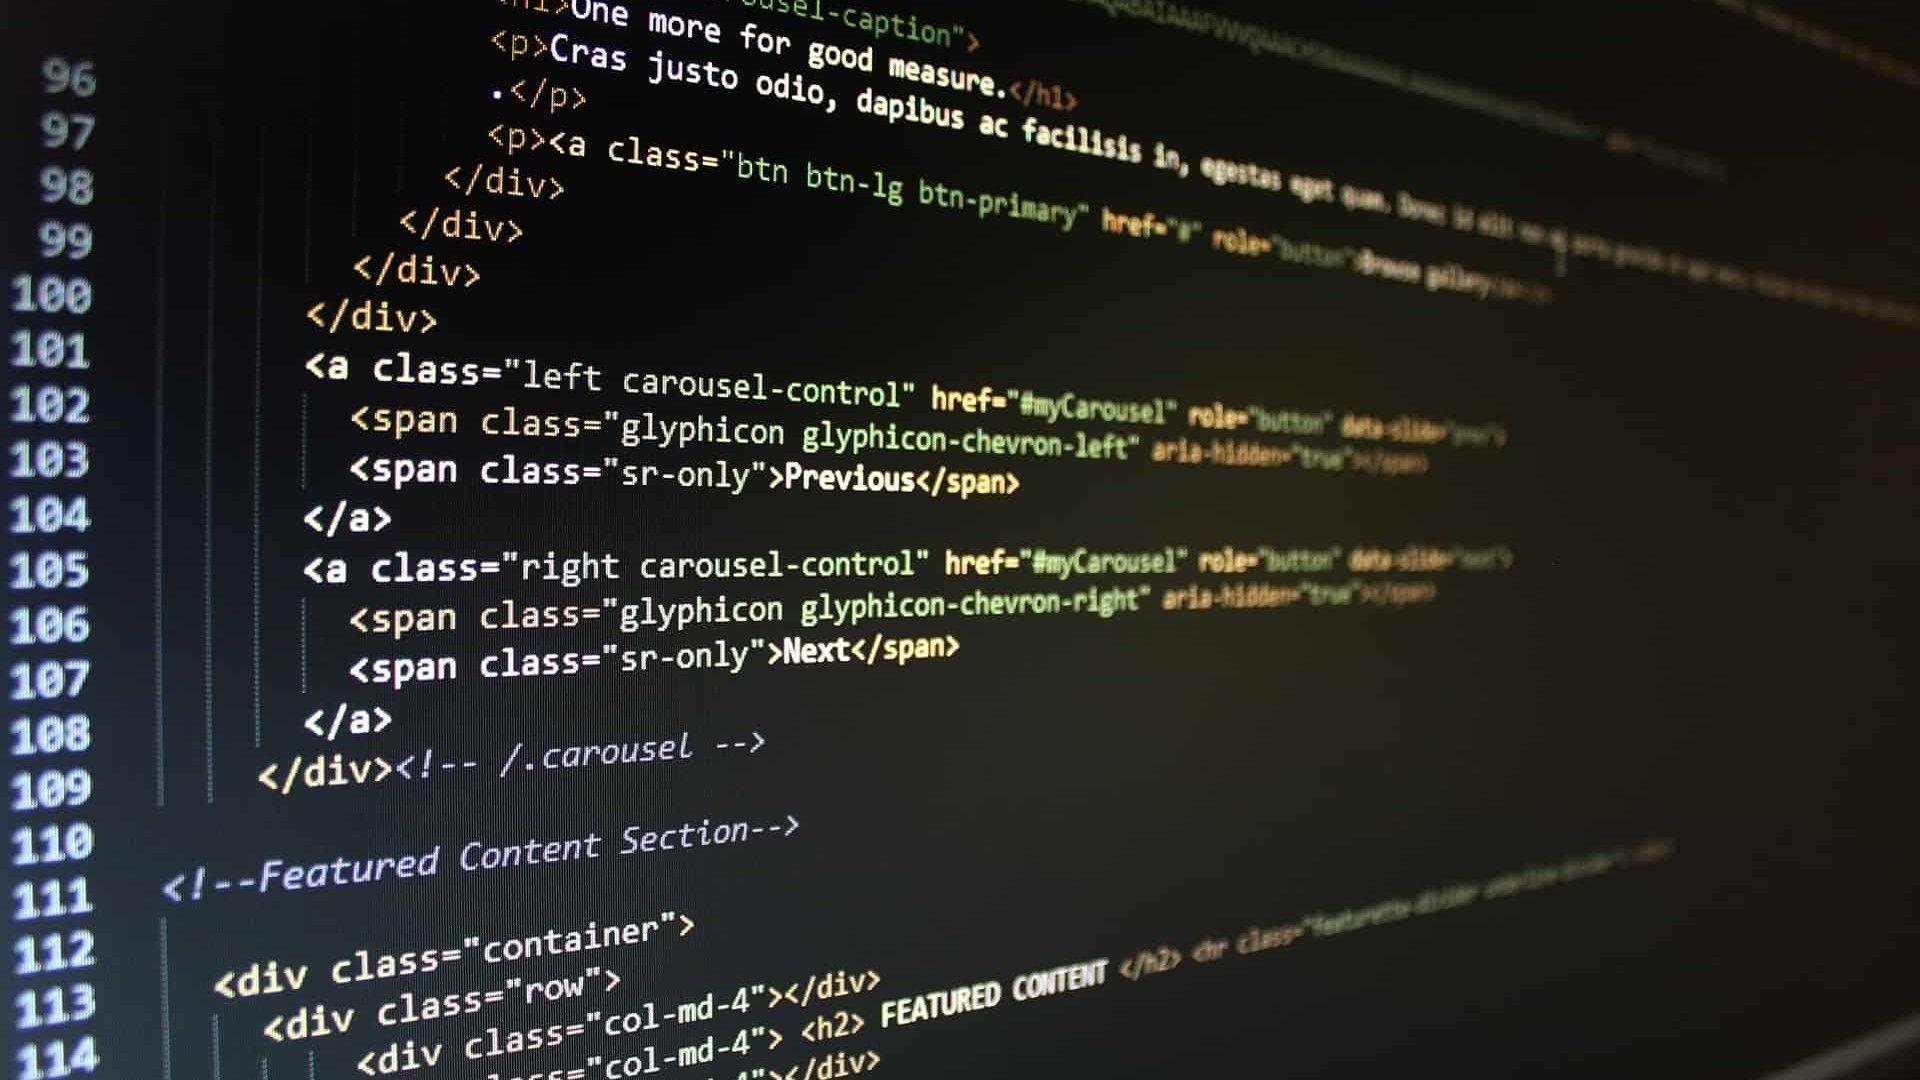 syntax highlighting, #code, #HTML, #CSS, #computer, #pixels